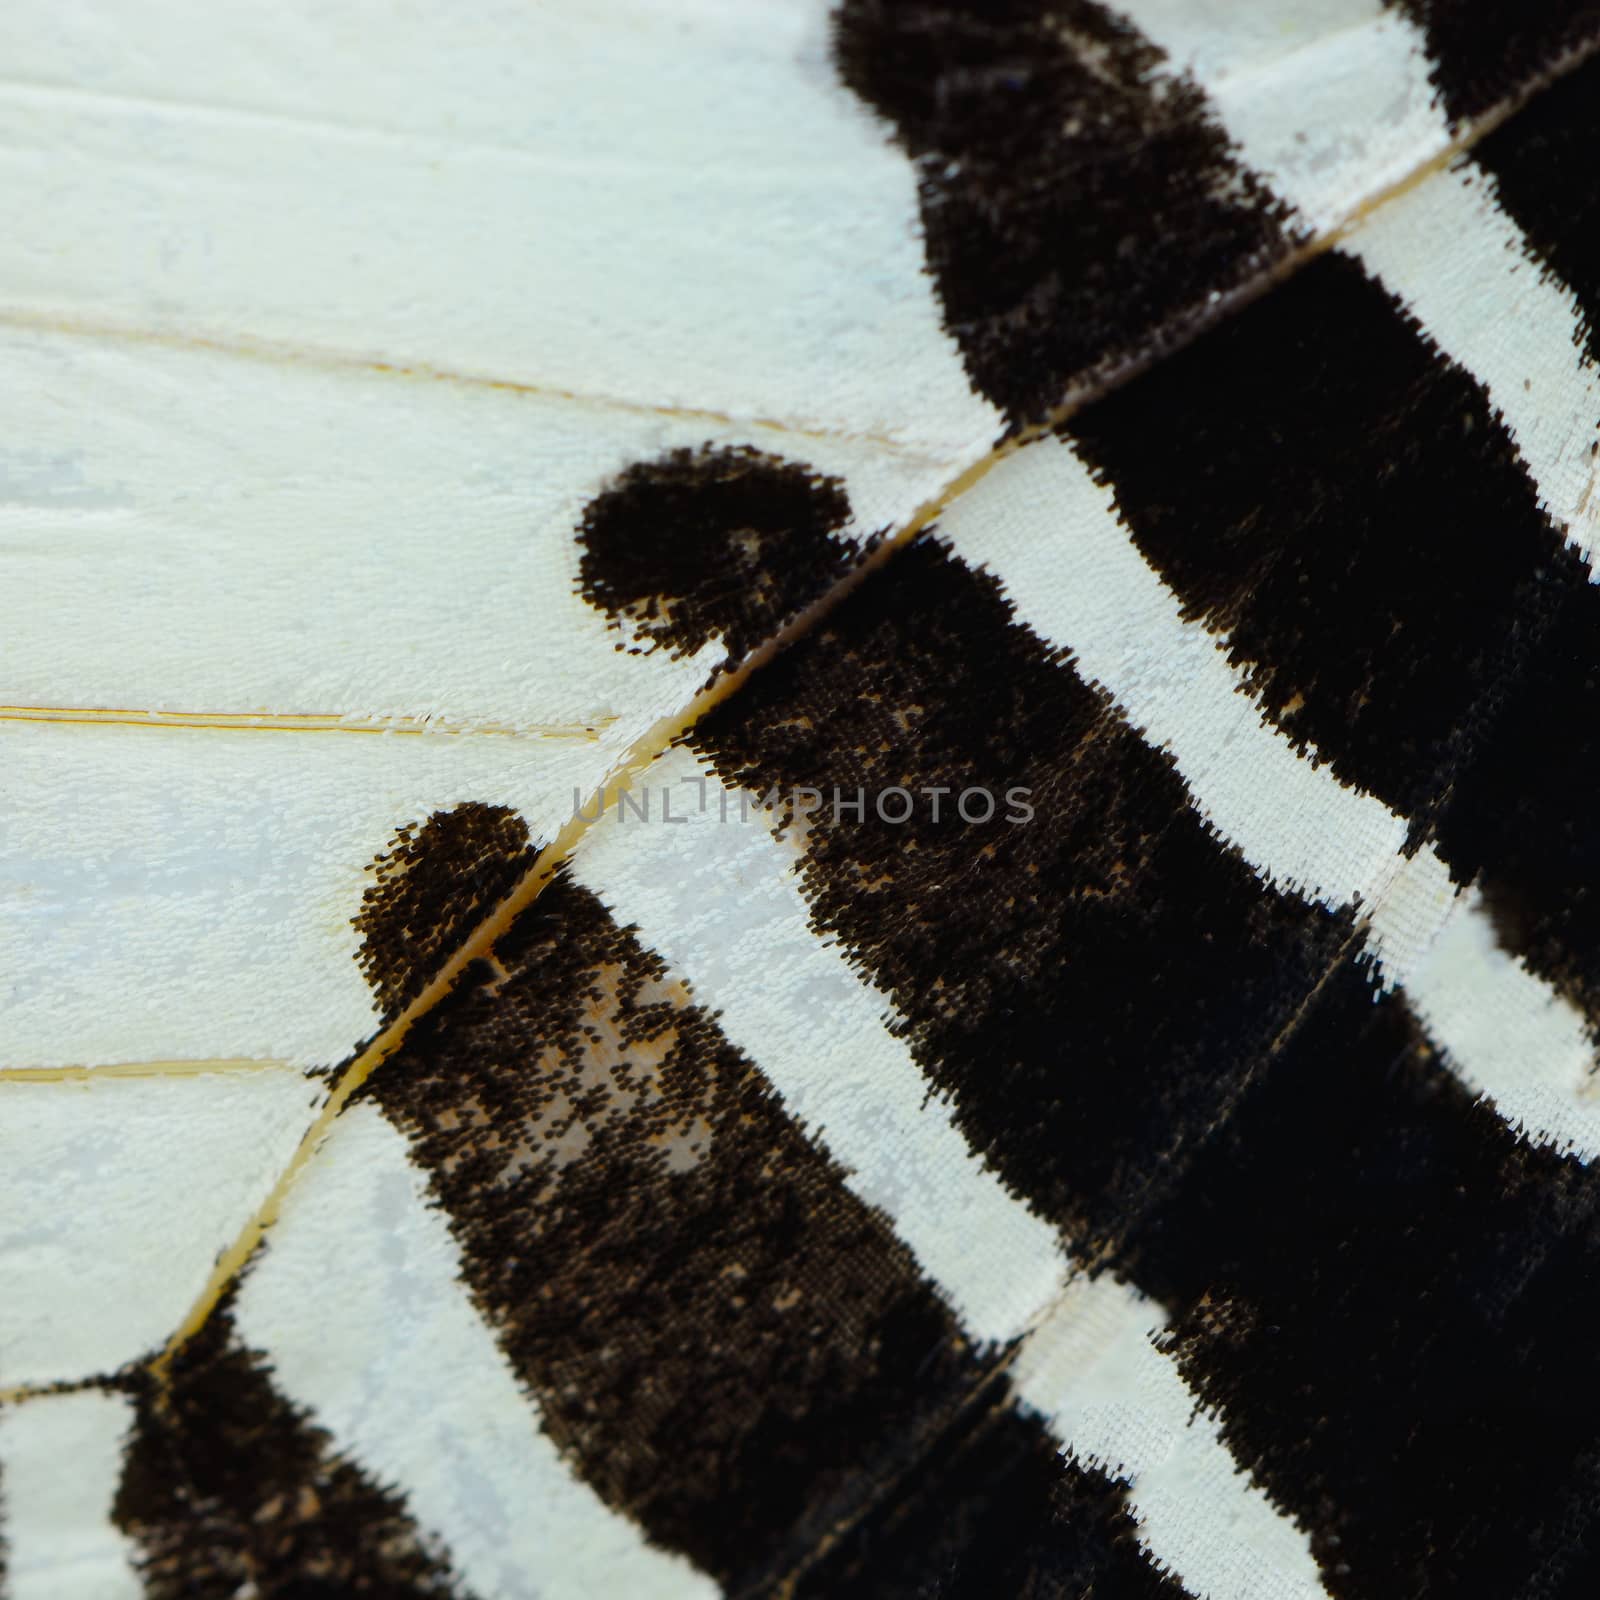 green and black butterfly wing by panuruangjan